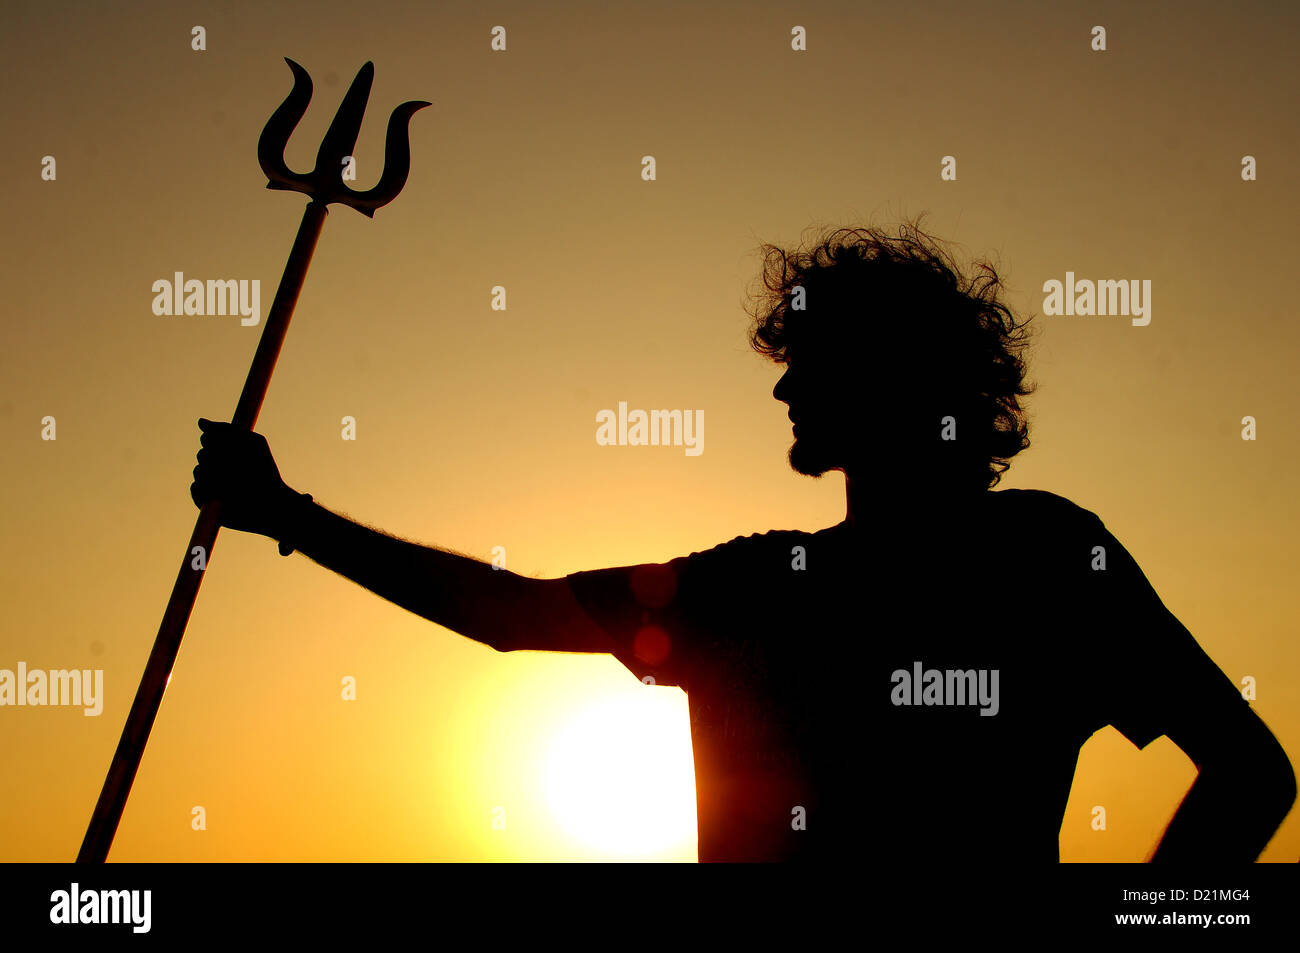 young guy with sward Stock Photo